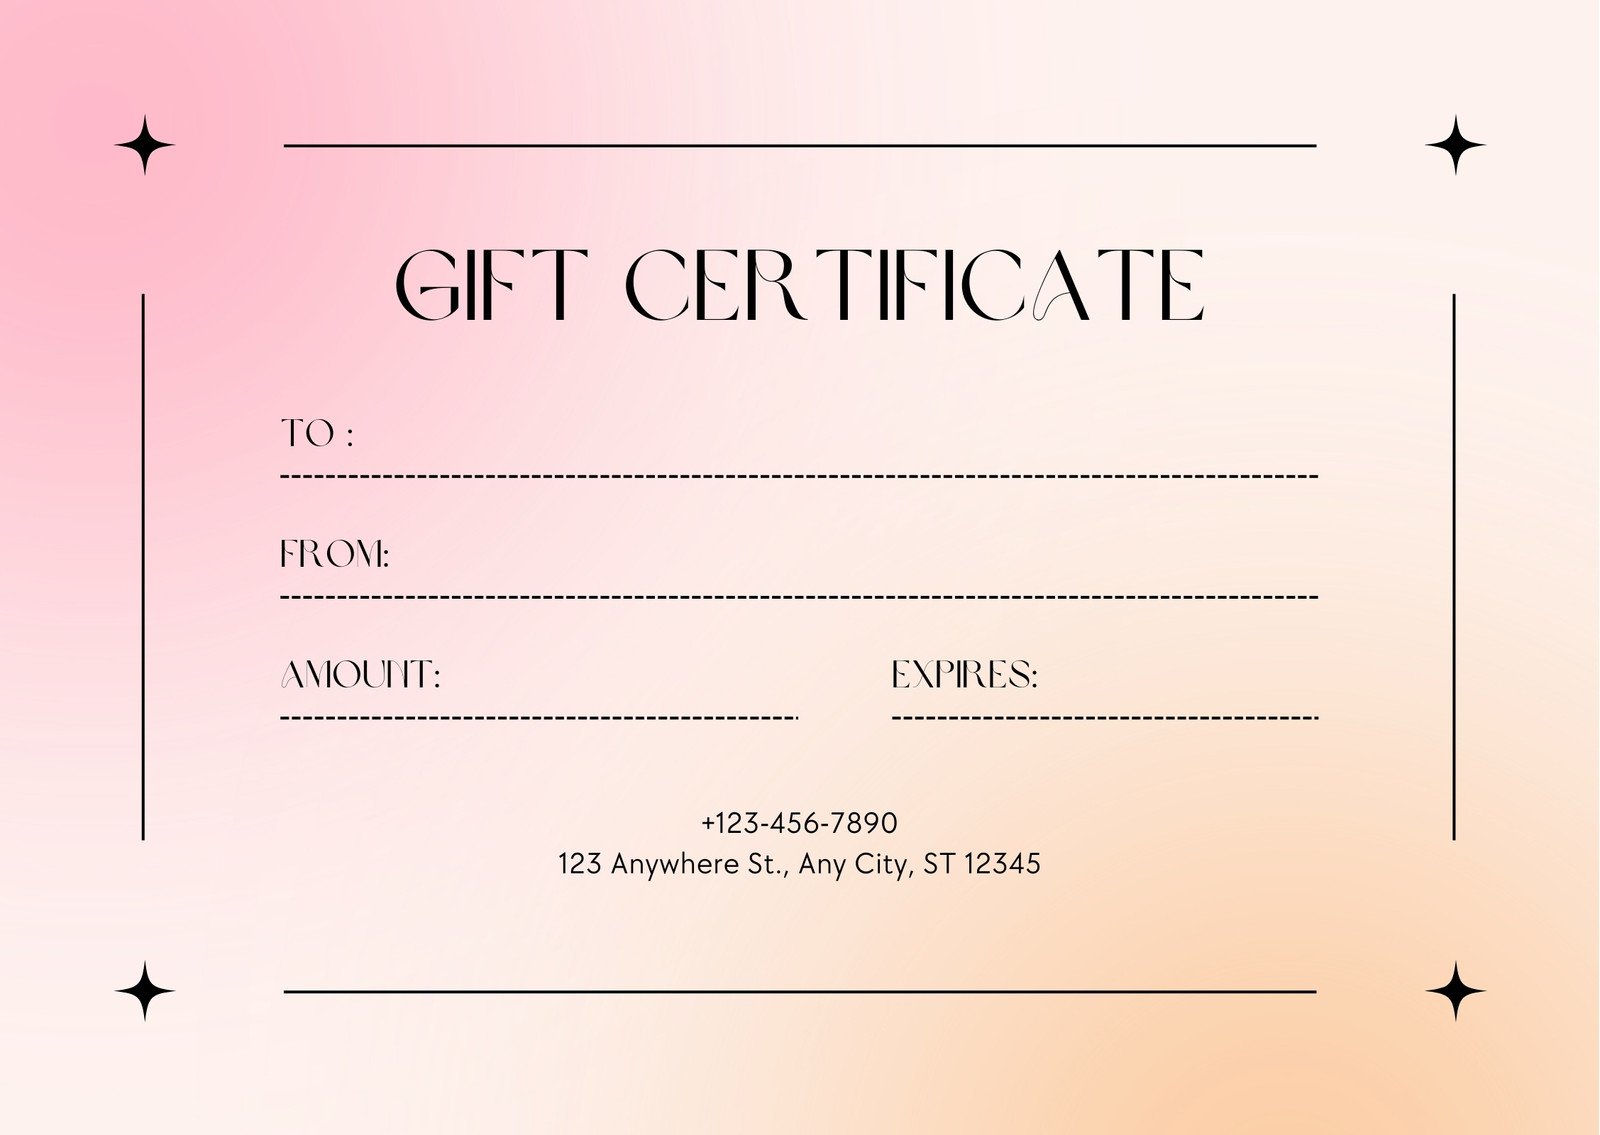 Free Printable Gift Certificate Templates prntbl